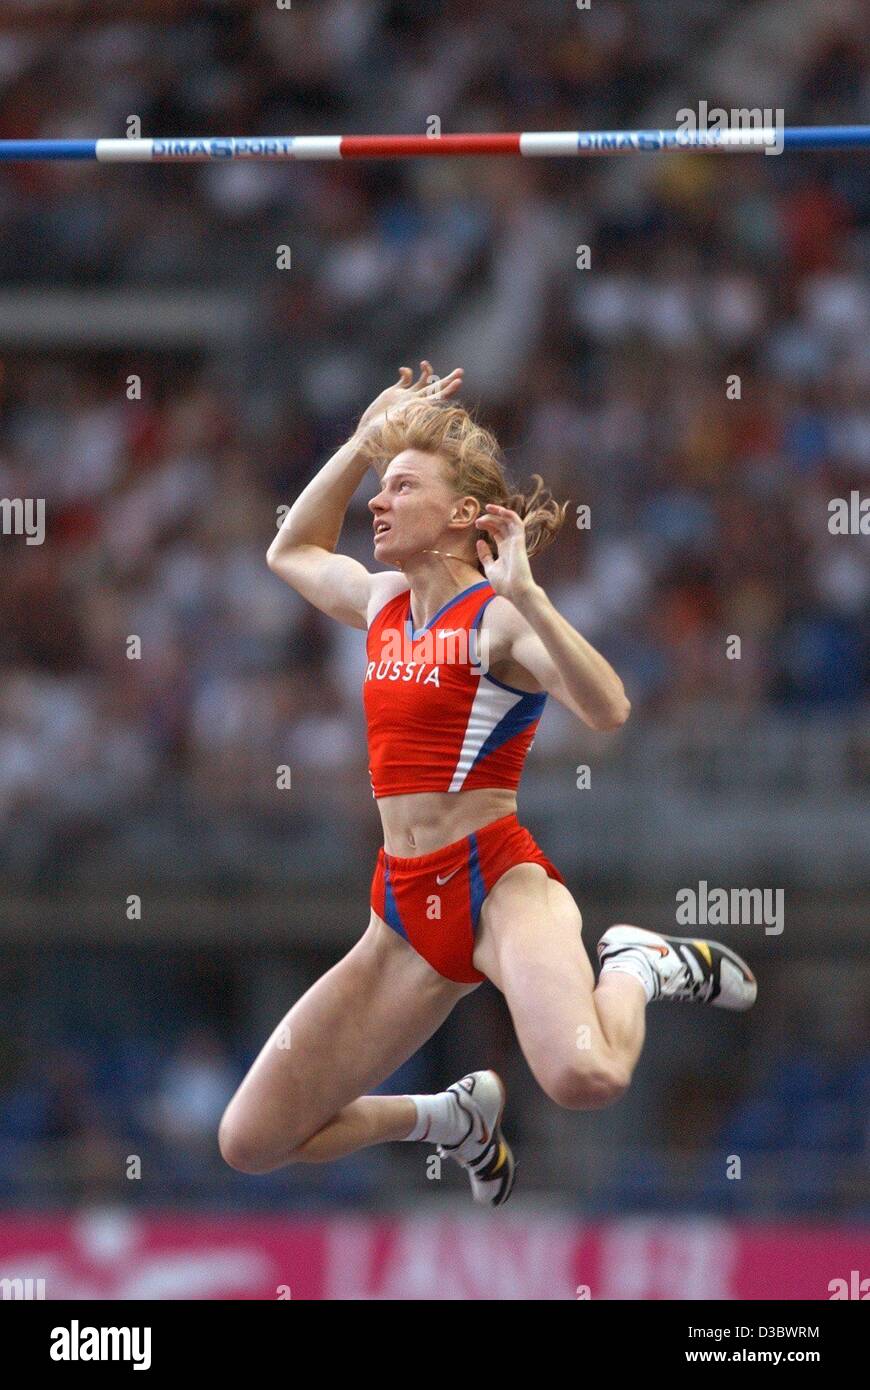 (dpa) - Russian pole vaulter Svetlana Feofanova is about to land after clearing the bar at 4.70 m during the pole vault competition at the 9th IAAF Athletic World Championships at the Stade de France in Paris, 25 August 2003. She wins gold clearing 4.75 m. Stock Photo